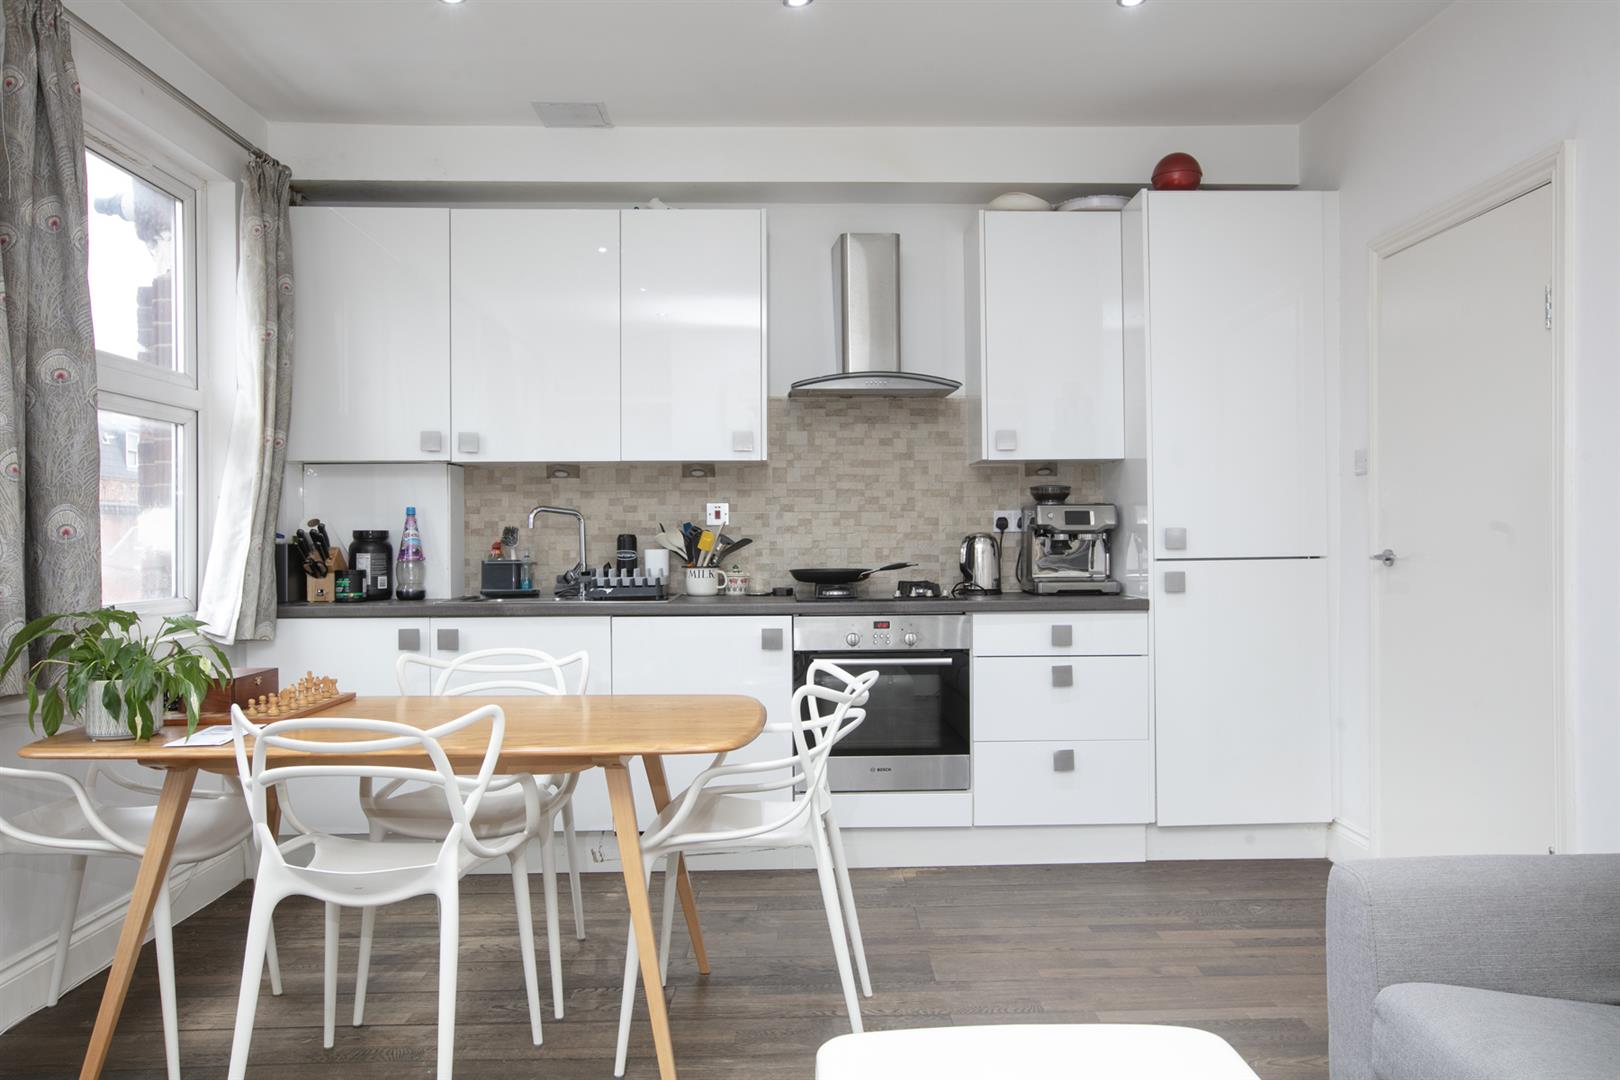 Flat - Conversion For Sale in Coldharbour Lane, Camberwell, SE5 1178 view3